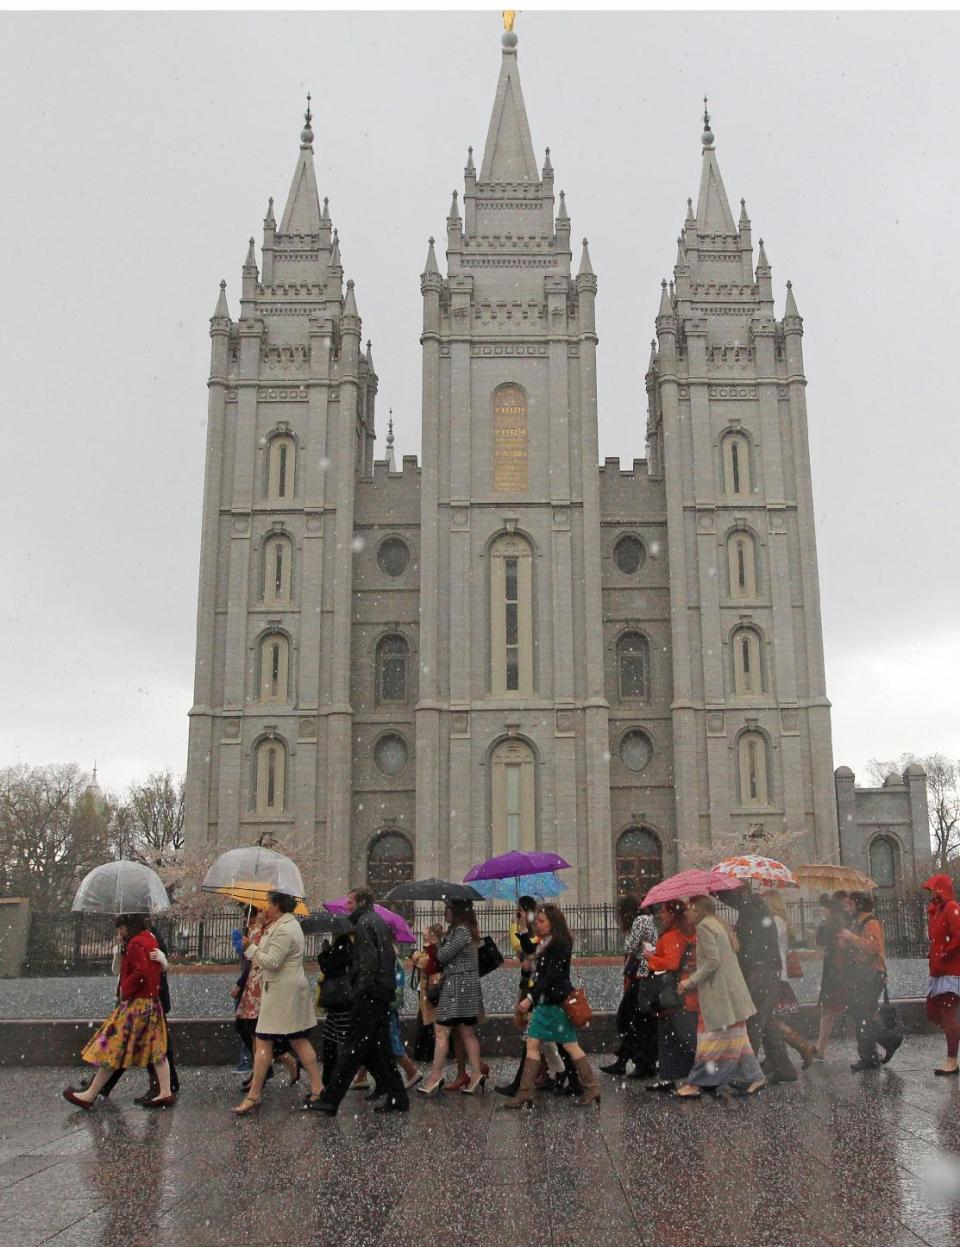 A Mormon's women group pushing the church to allow women in the priesthood march to Temple Square during the two-day Mormon church conference Saturday, April 5, 2014, in Salt lake City. The church has asked them to reconsider, and barred media from going on church property during the demonstration. Mormon officials allowed the women's group to demonstrate its displeasure for not being allowed in an all-male meeting, on church property but still didn't let them attend. (AP Photo/Rick Bowmer)